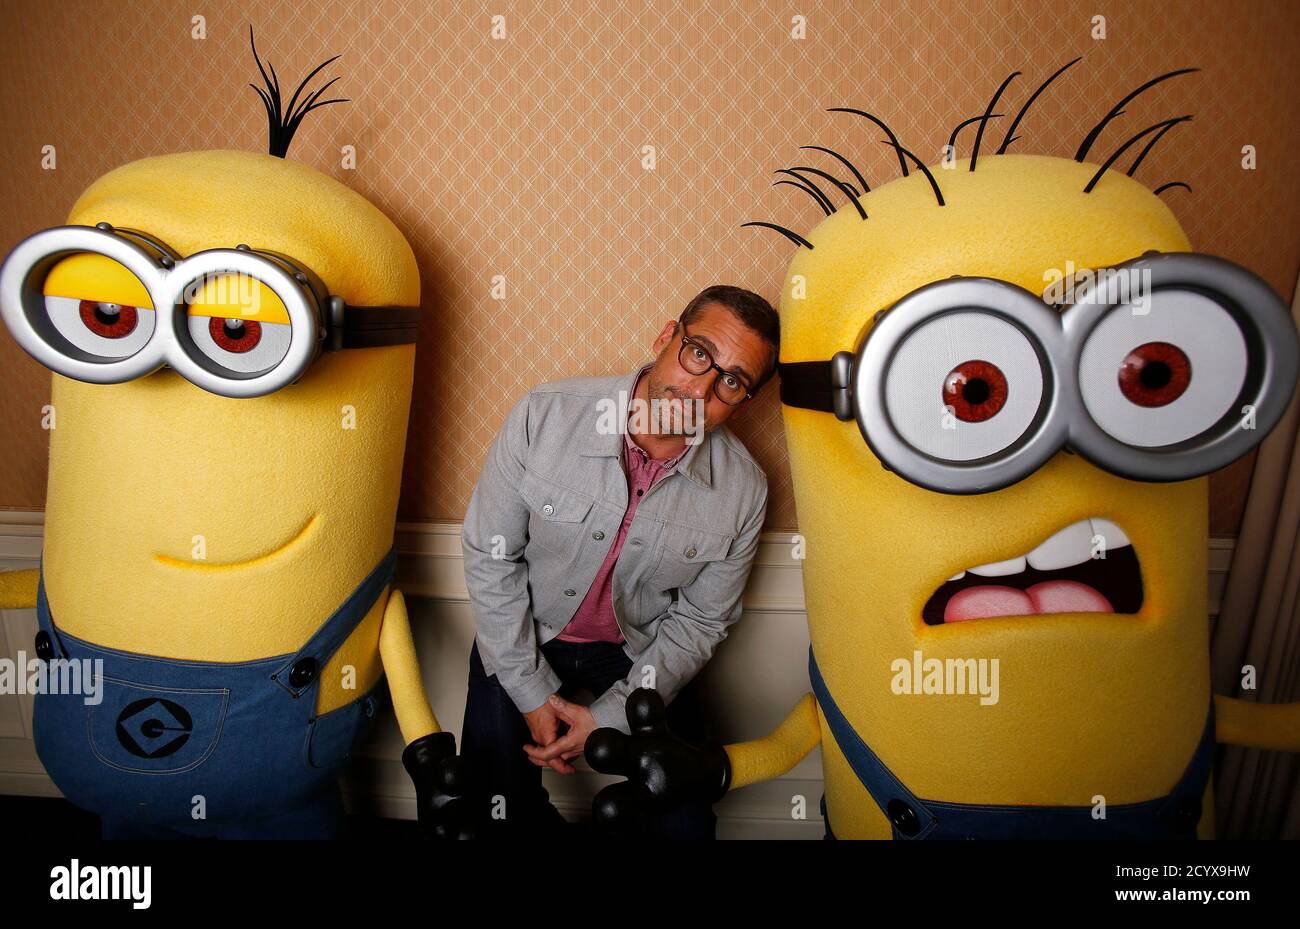 Actor Steve Carell poses with two life-size minion characters while  promoting his upcoming movie 